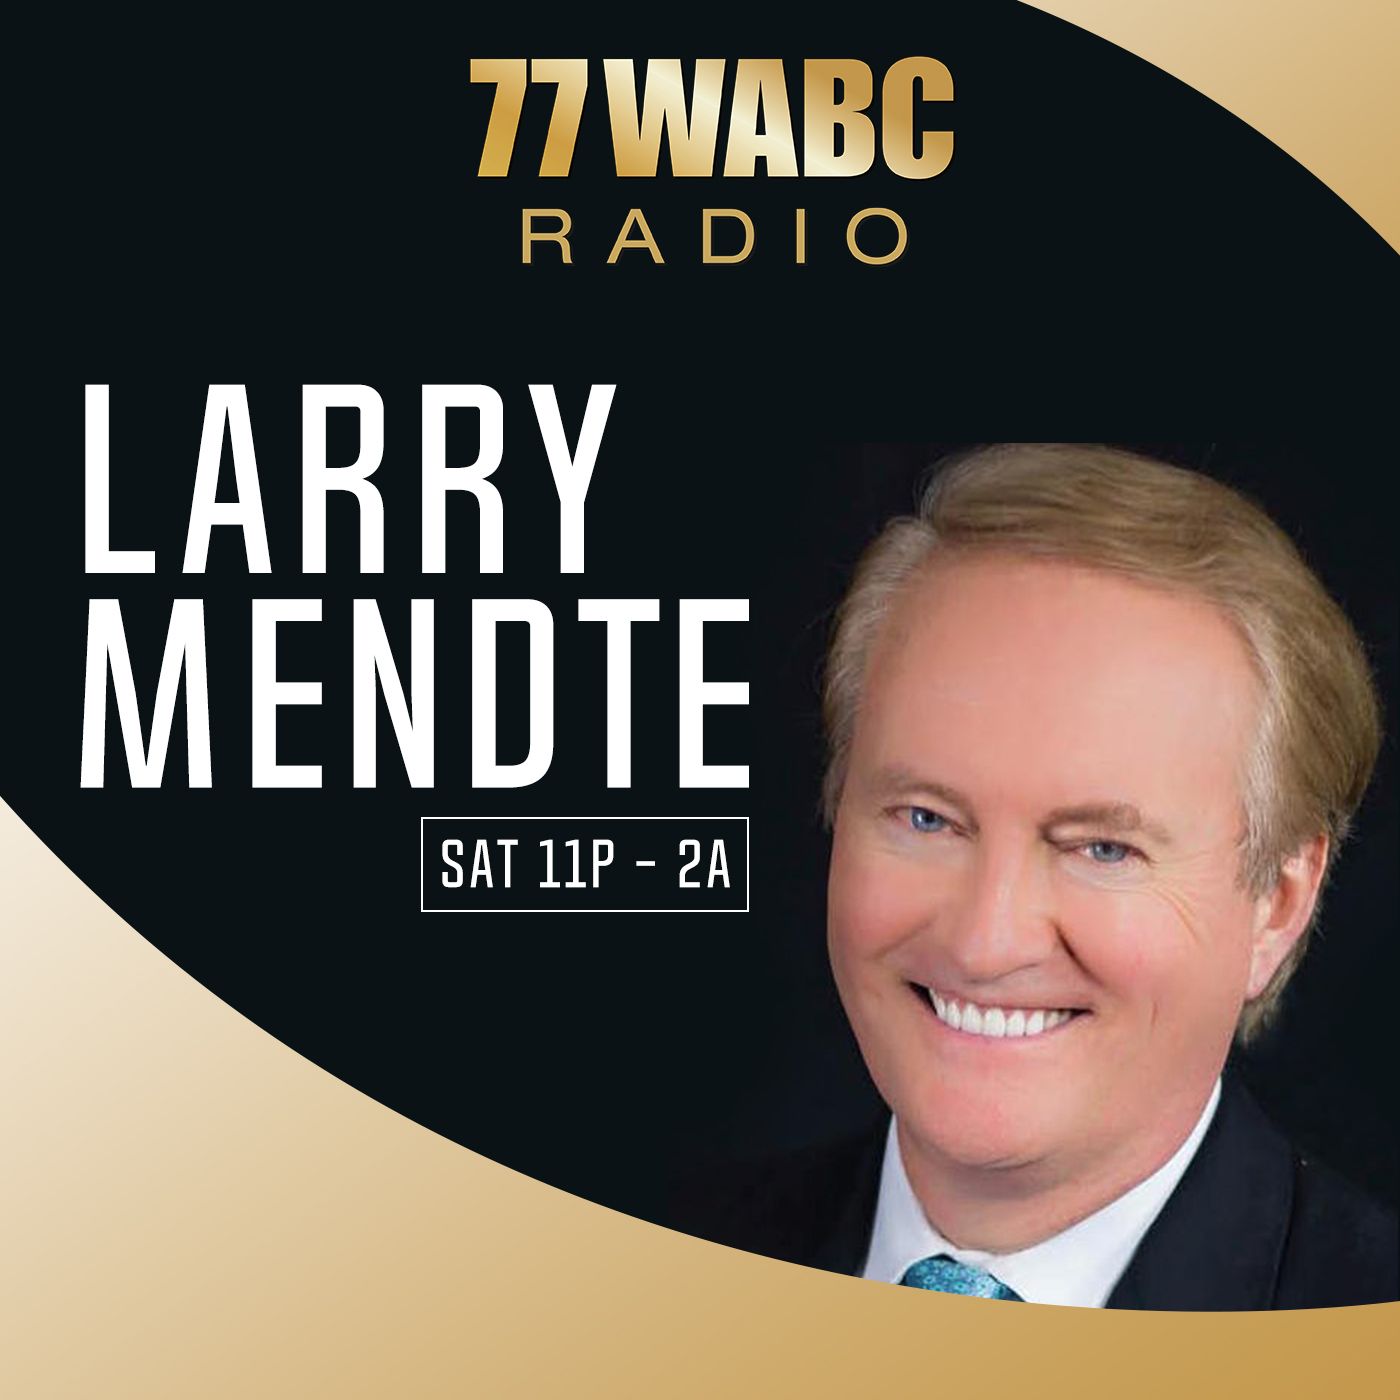 The Larry Mendte Show